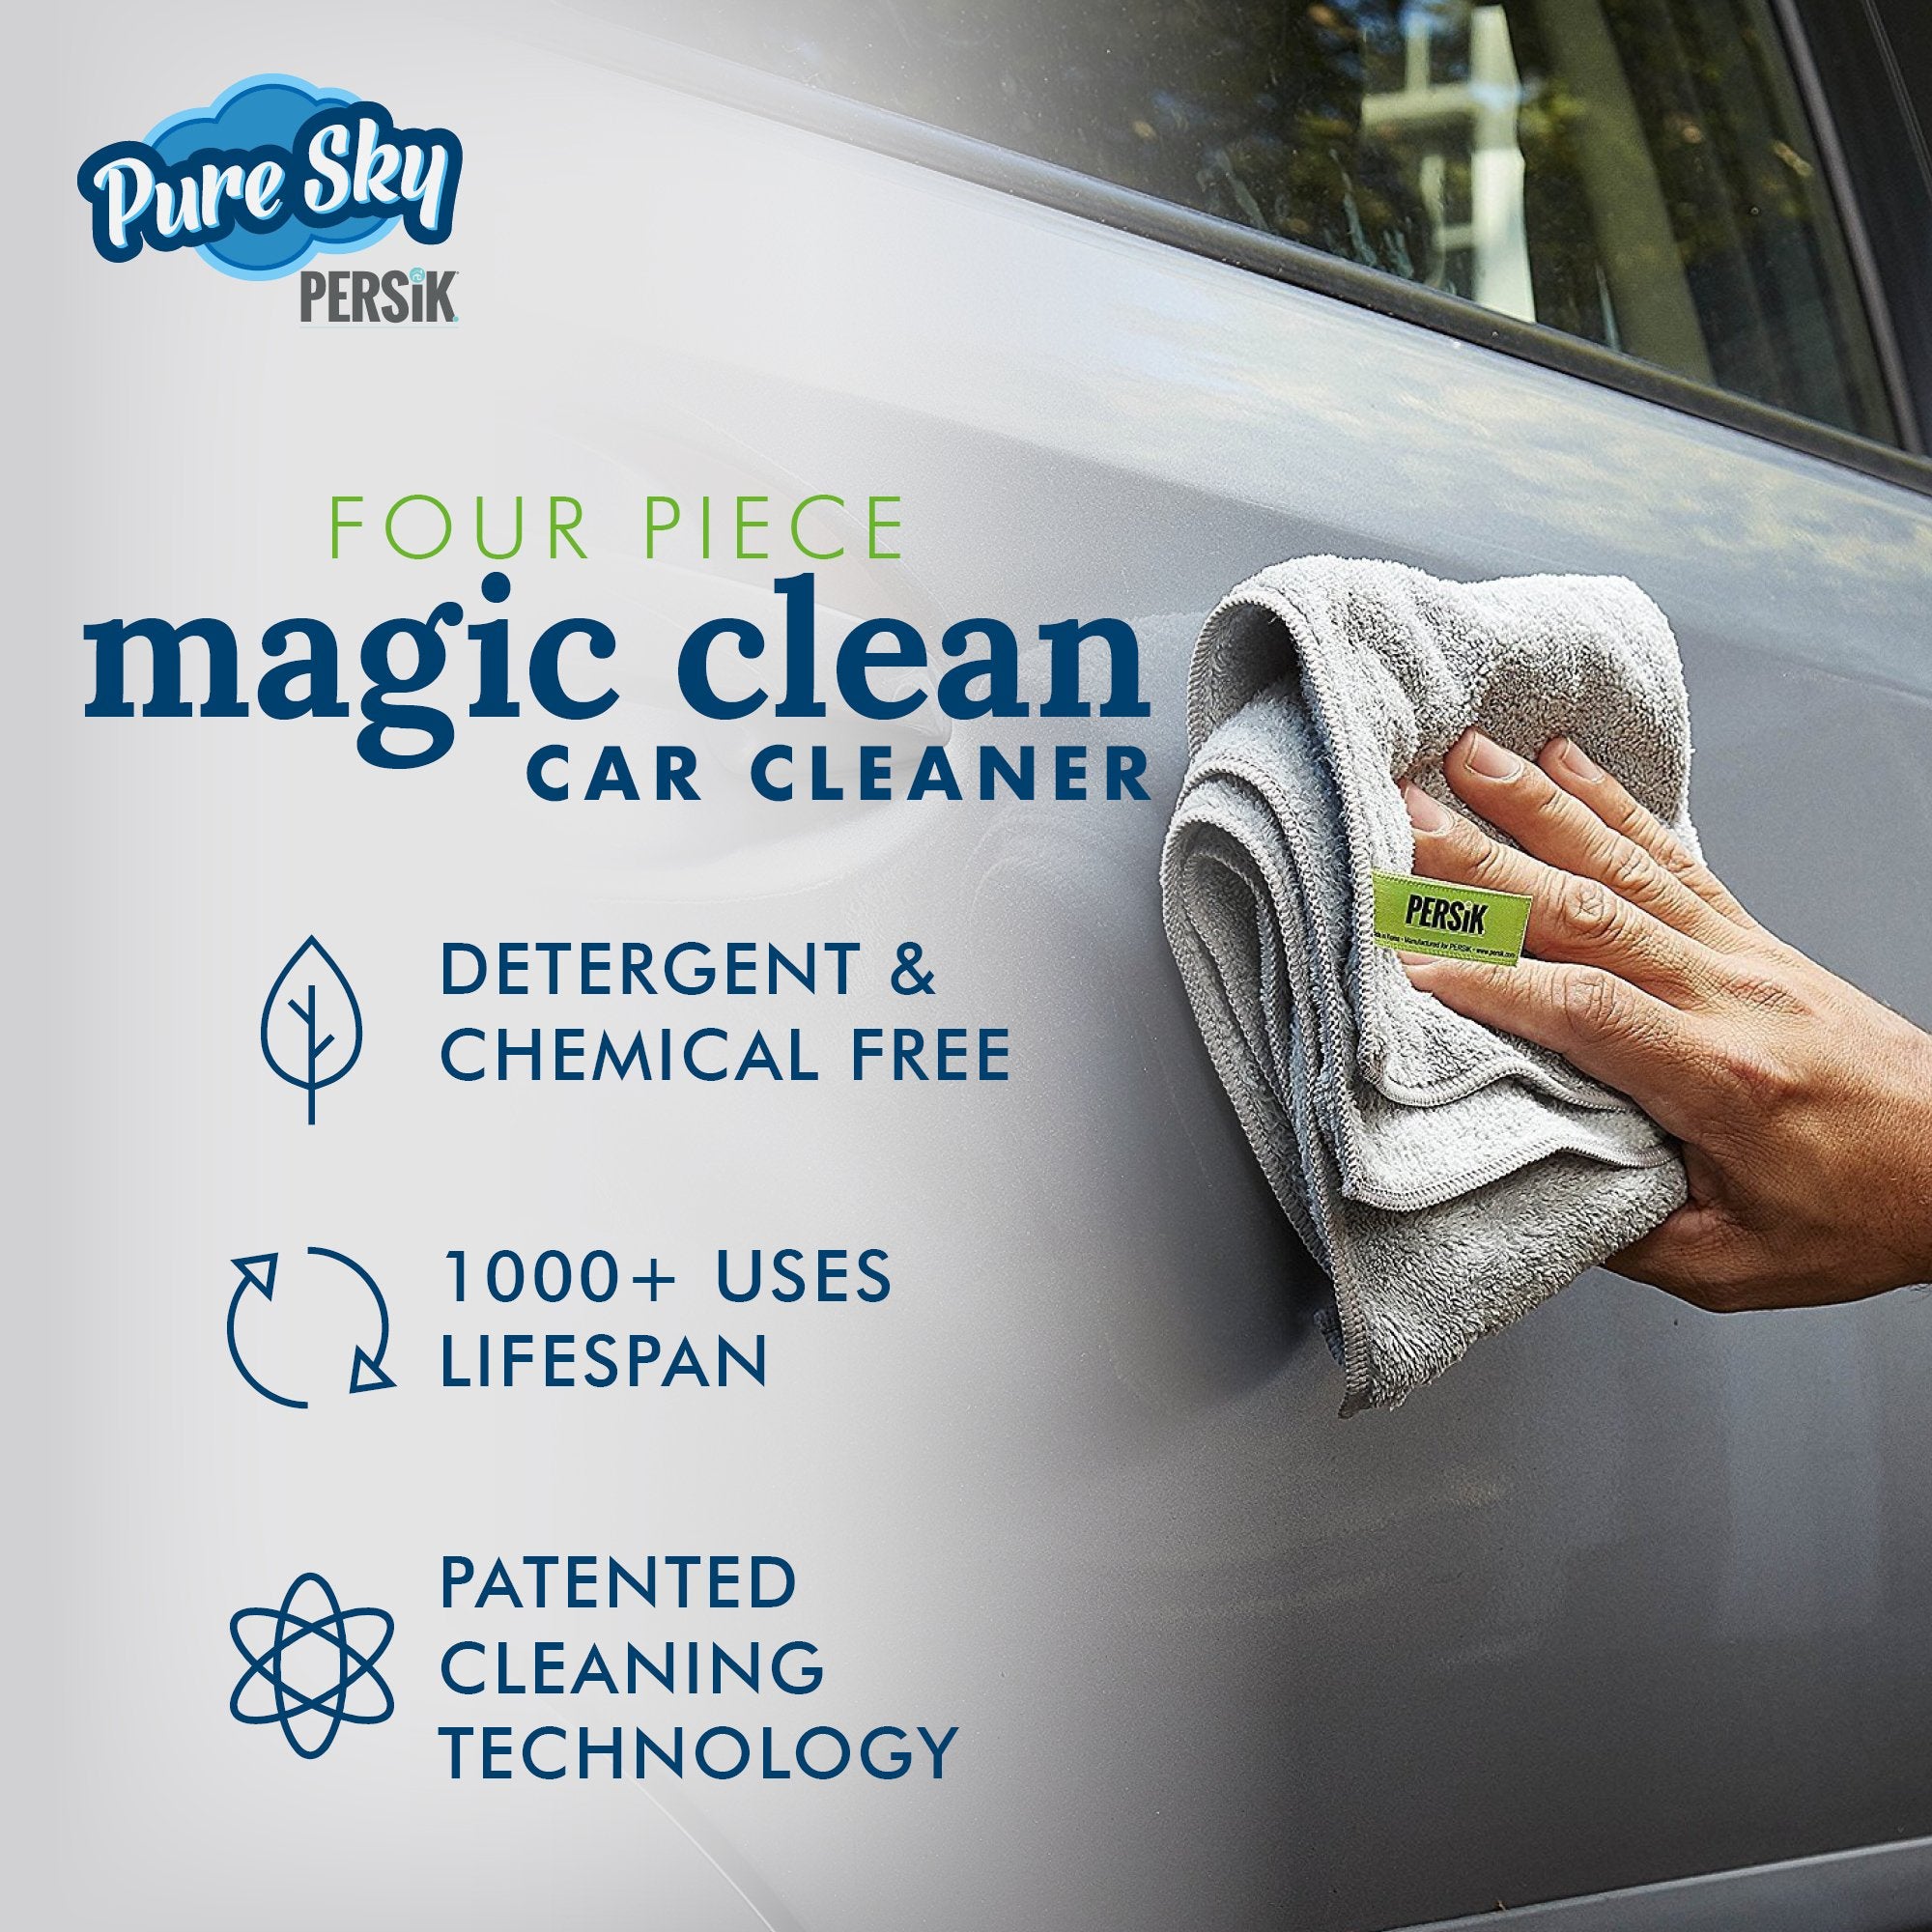 Skycase Microfiber Towels for Cars,[5 Pack]Professional Premium All-Purpose Microfiber Towels for Household Cleaning Car Washing,Highly Absorbent,Lint